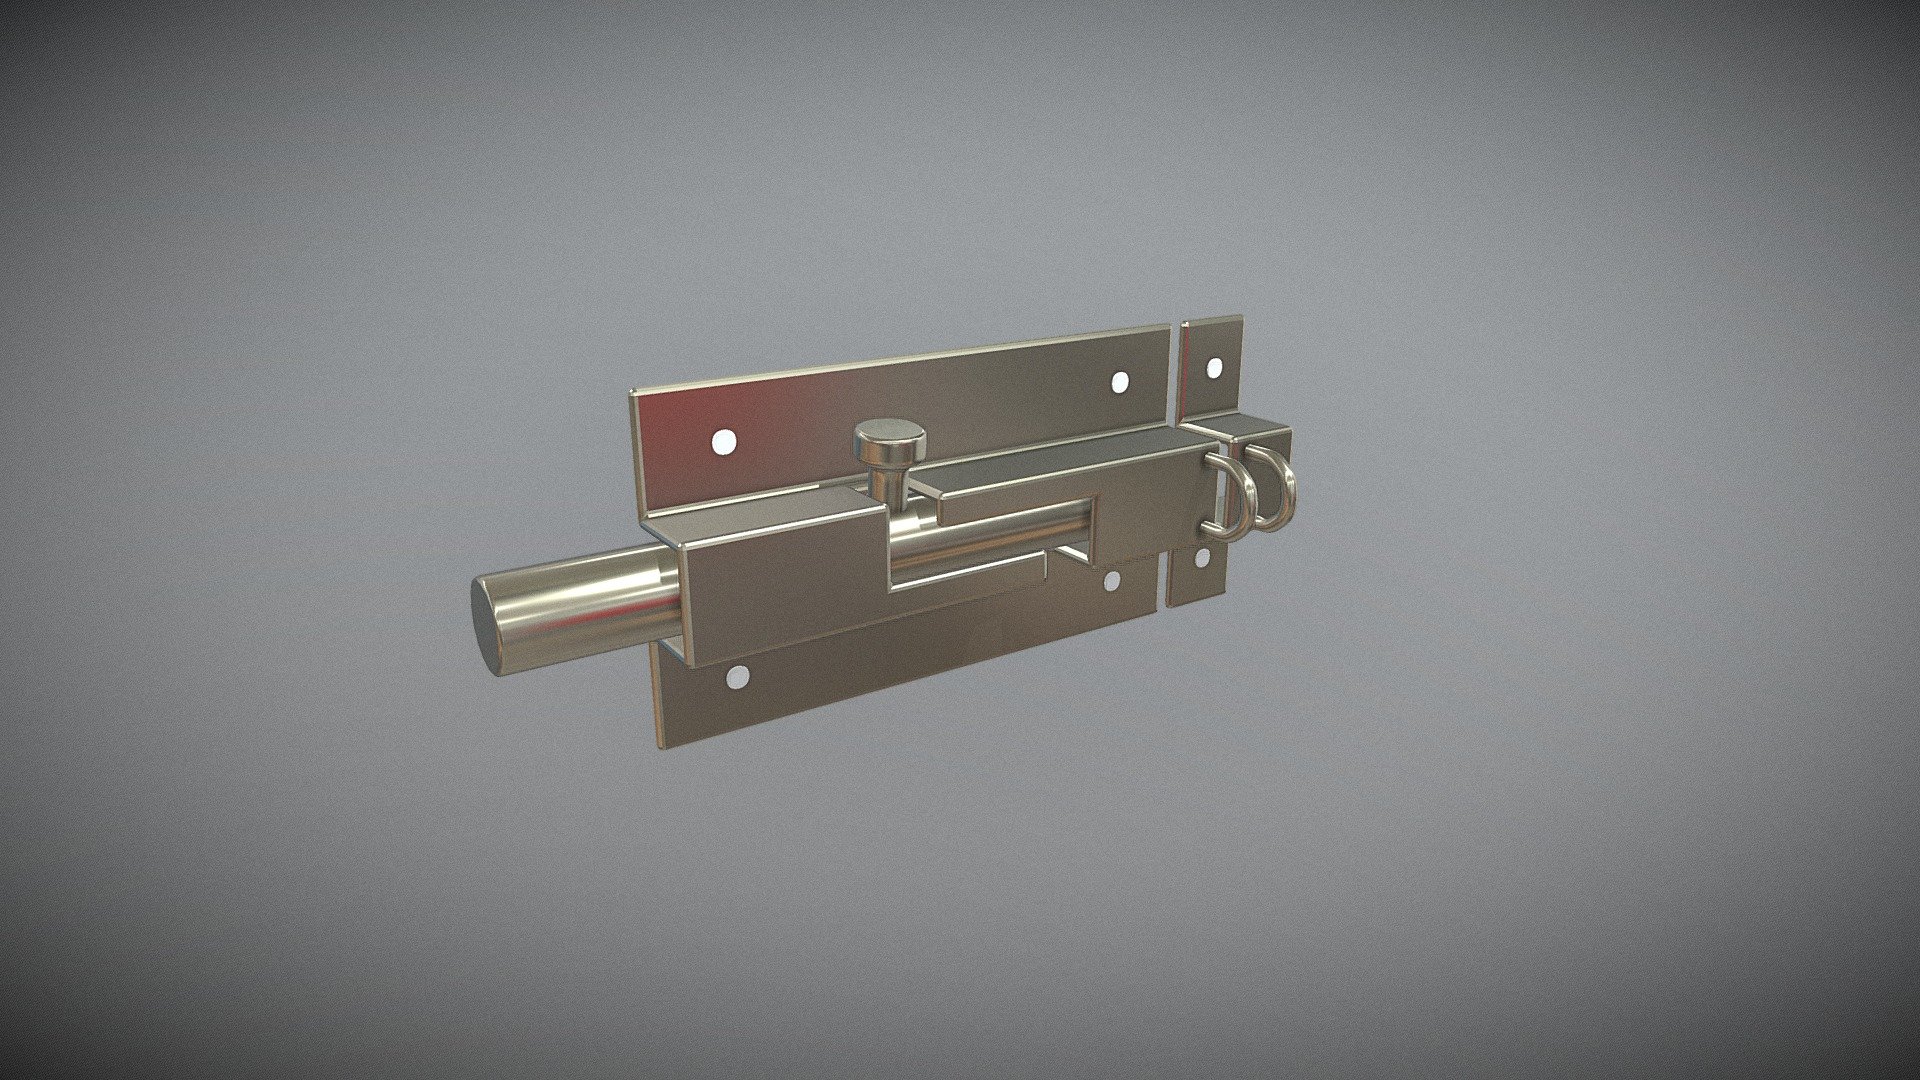 stainless steel door latch lock with animation made by blender free to use.
with lock and unlock animation 
easy to edit with blender 3d model